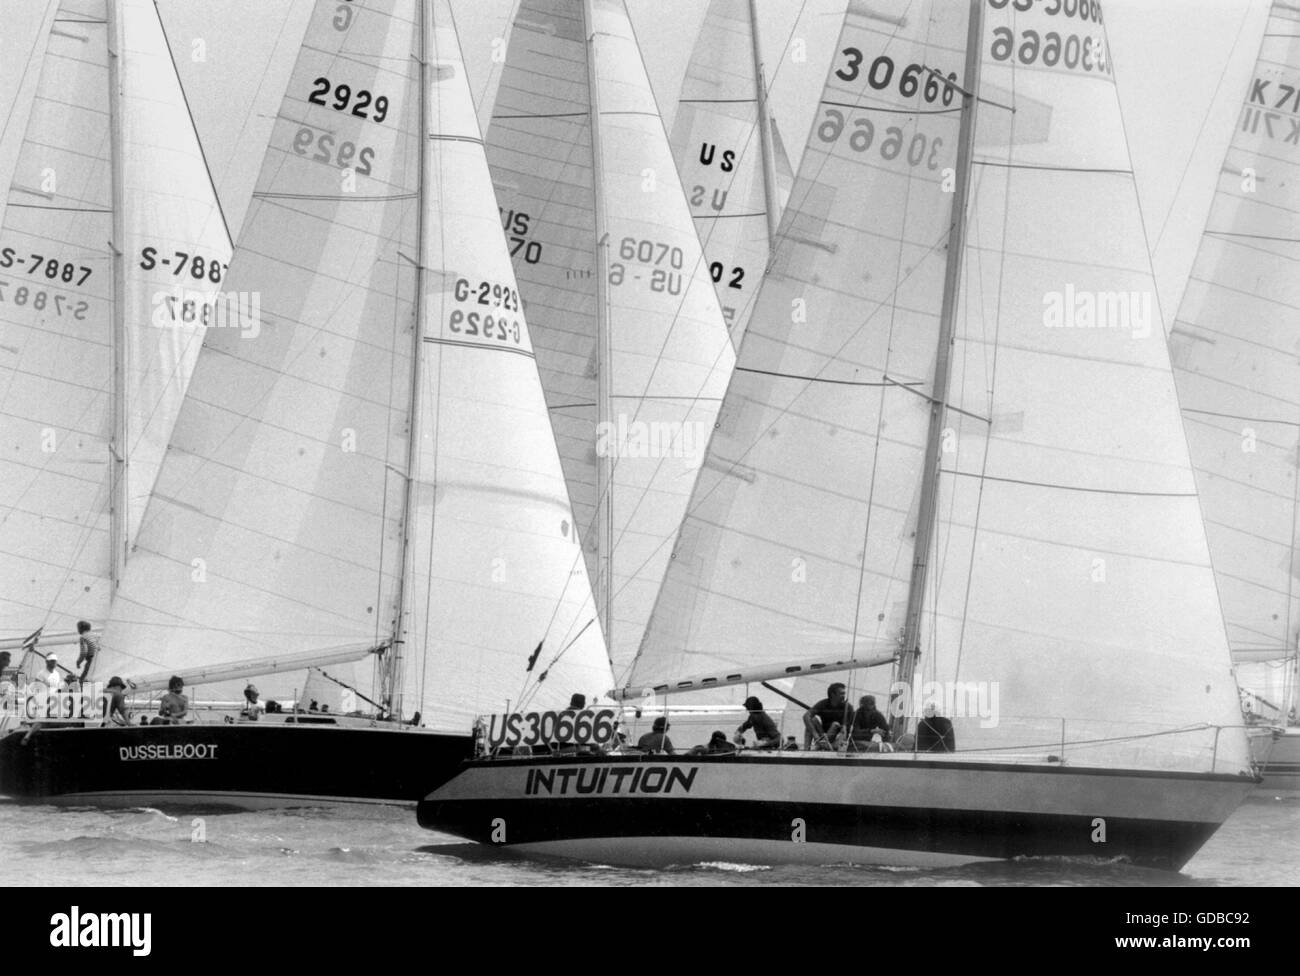 AJAX NEWS PHOTOS. 29TH JULY, 1981. SOLENT,ENGLAND. - ADMIRAL'S CUP FLEET - START OF THE 1ST RACE AFTER GENERAL RECALL. INTUITION, SCARAMOUCHE AND STARS AND STRIPES  (ALL USA) BATTLE TO BREAK OUT AT THE LEEWWARD END OF THE LINE.  PHOTO:JONATHAN EASTLAND/AJAX  REF:YAR ADC FLEET 1981 Stock Photo